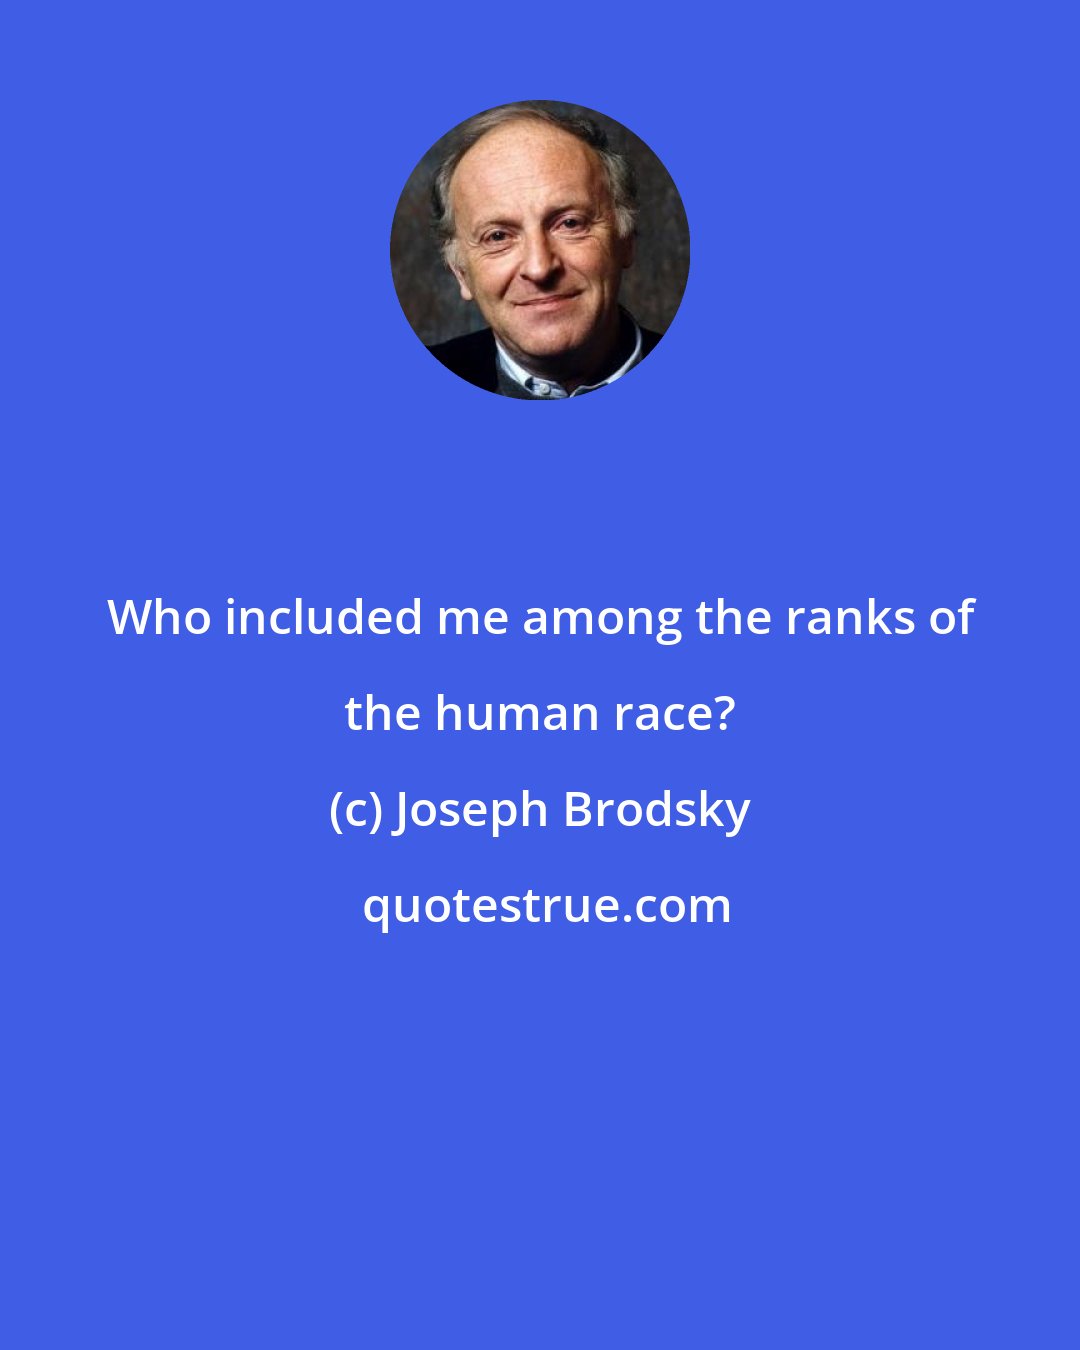 Joseph Brodsky: Who included me among the ranks of the human race?